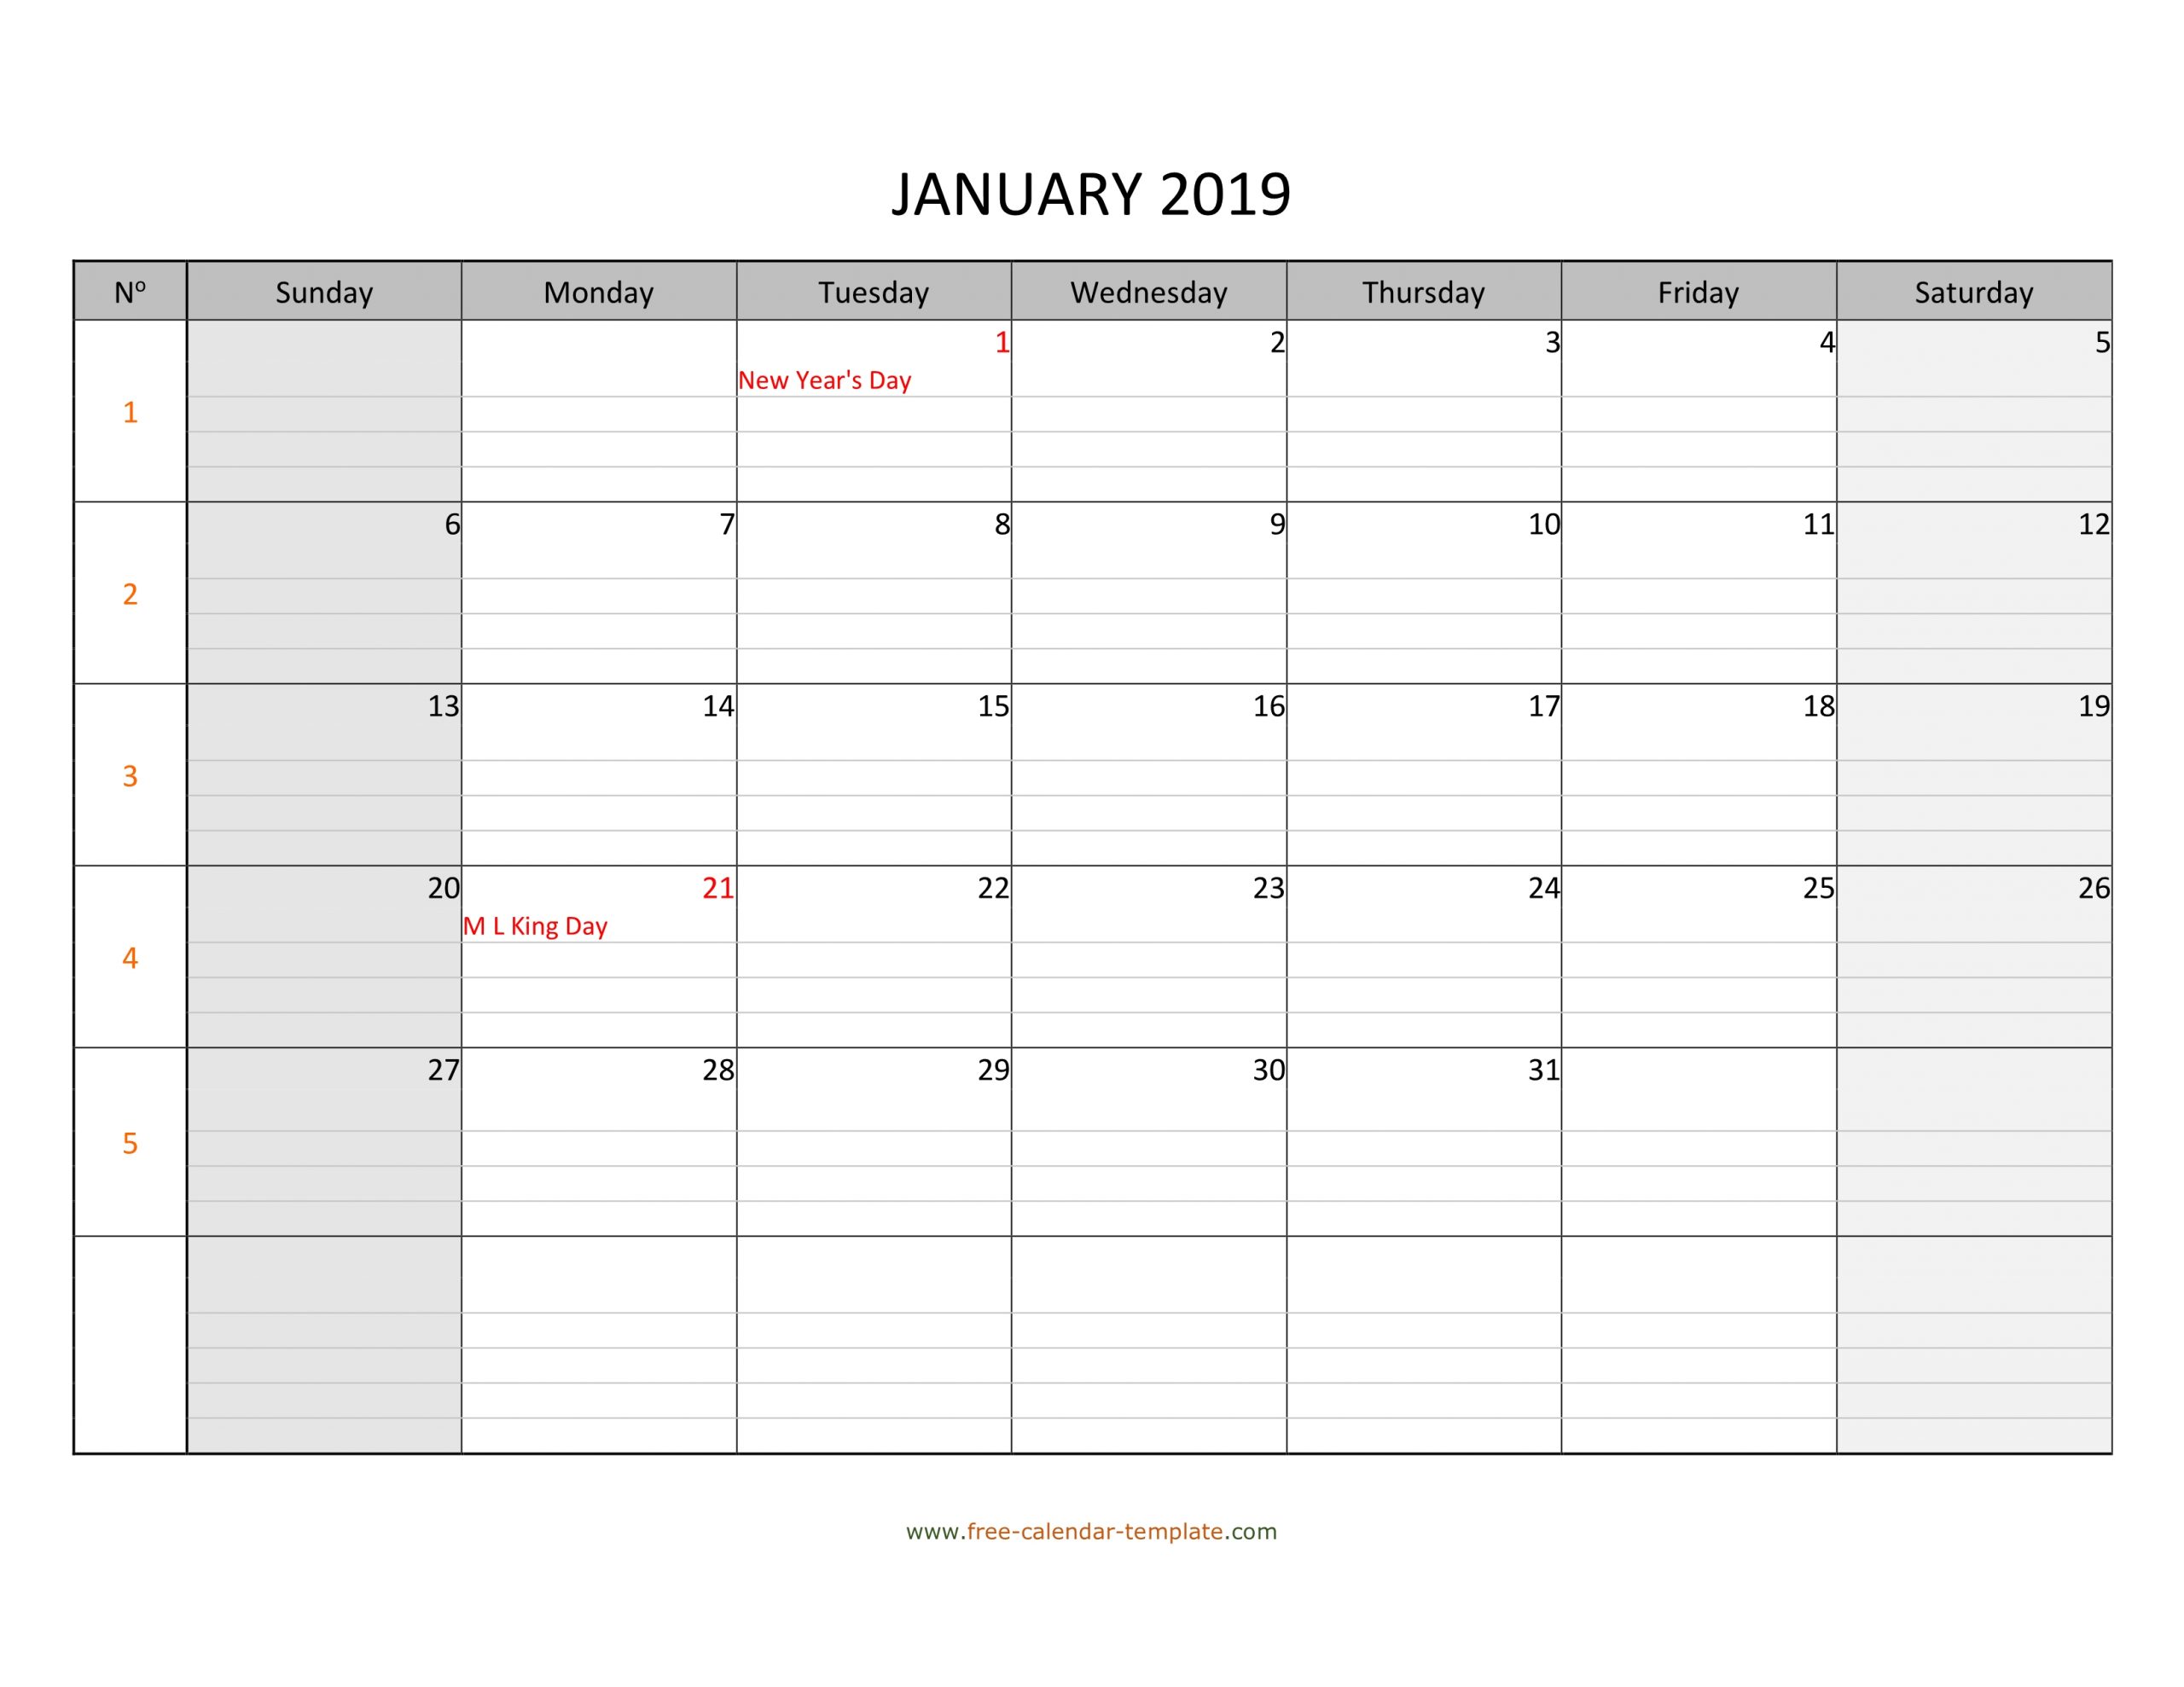 monthly calandar template start from sunday example